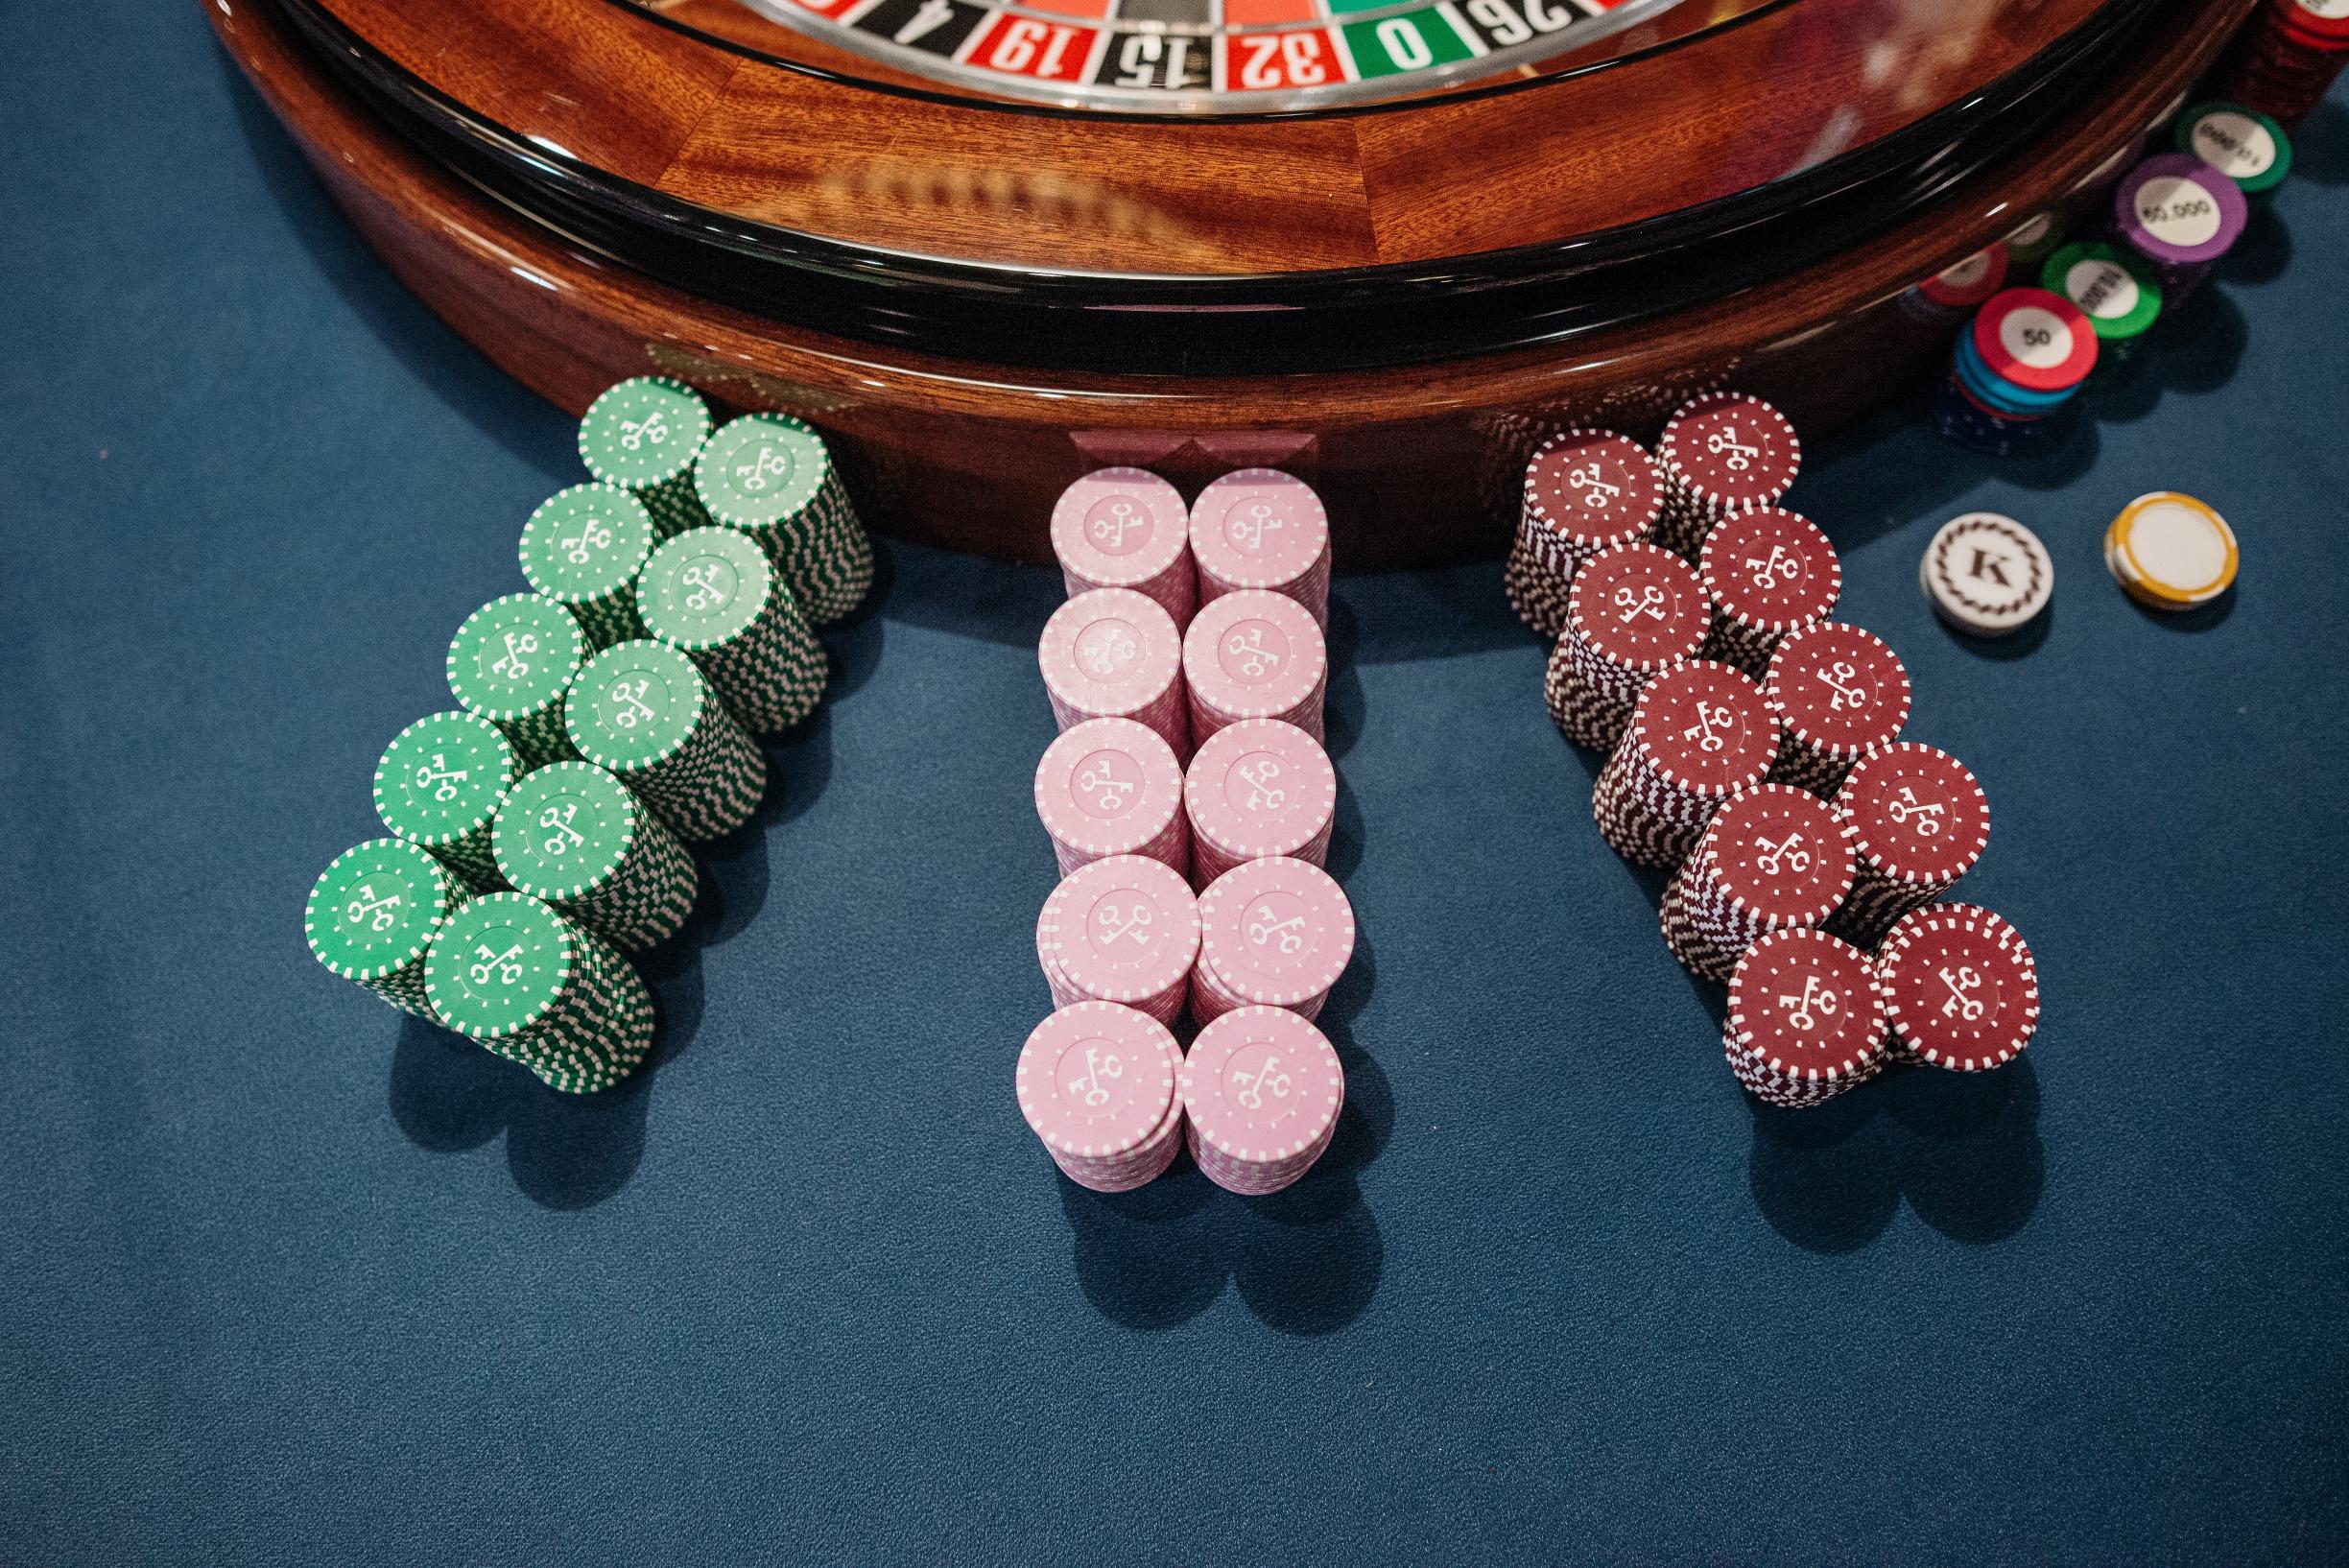 Understanding the Role of Probability in Blackjack